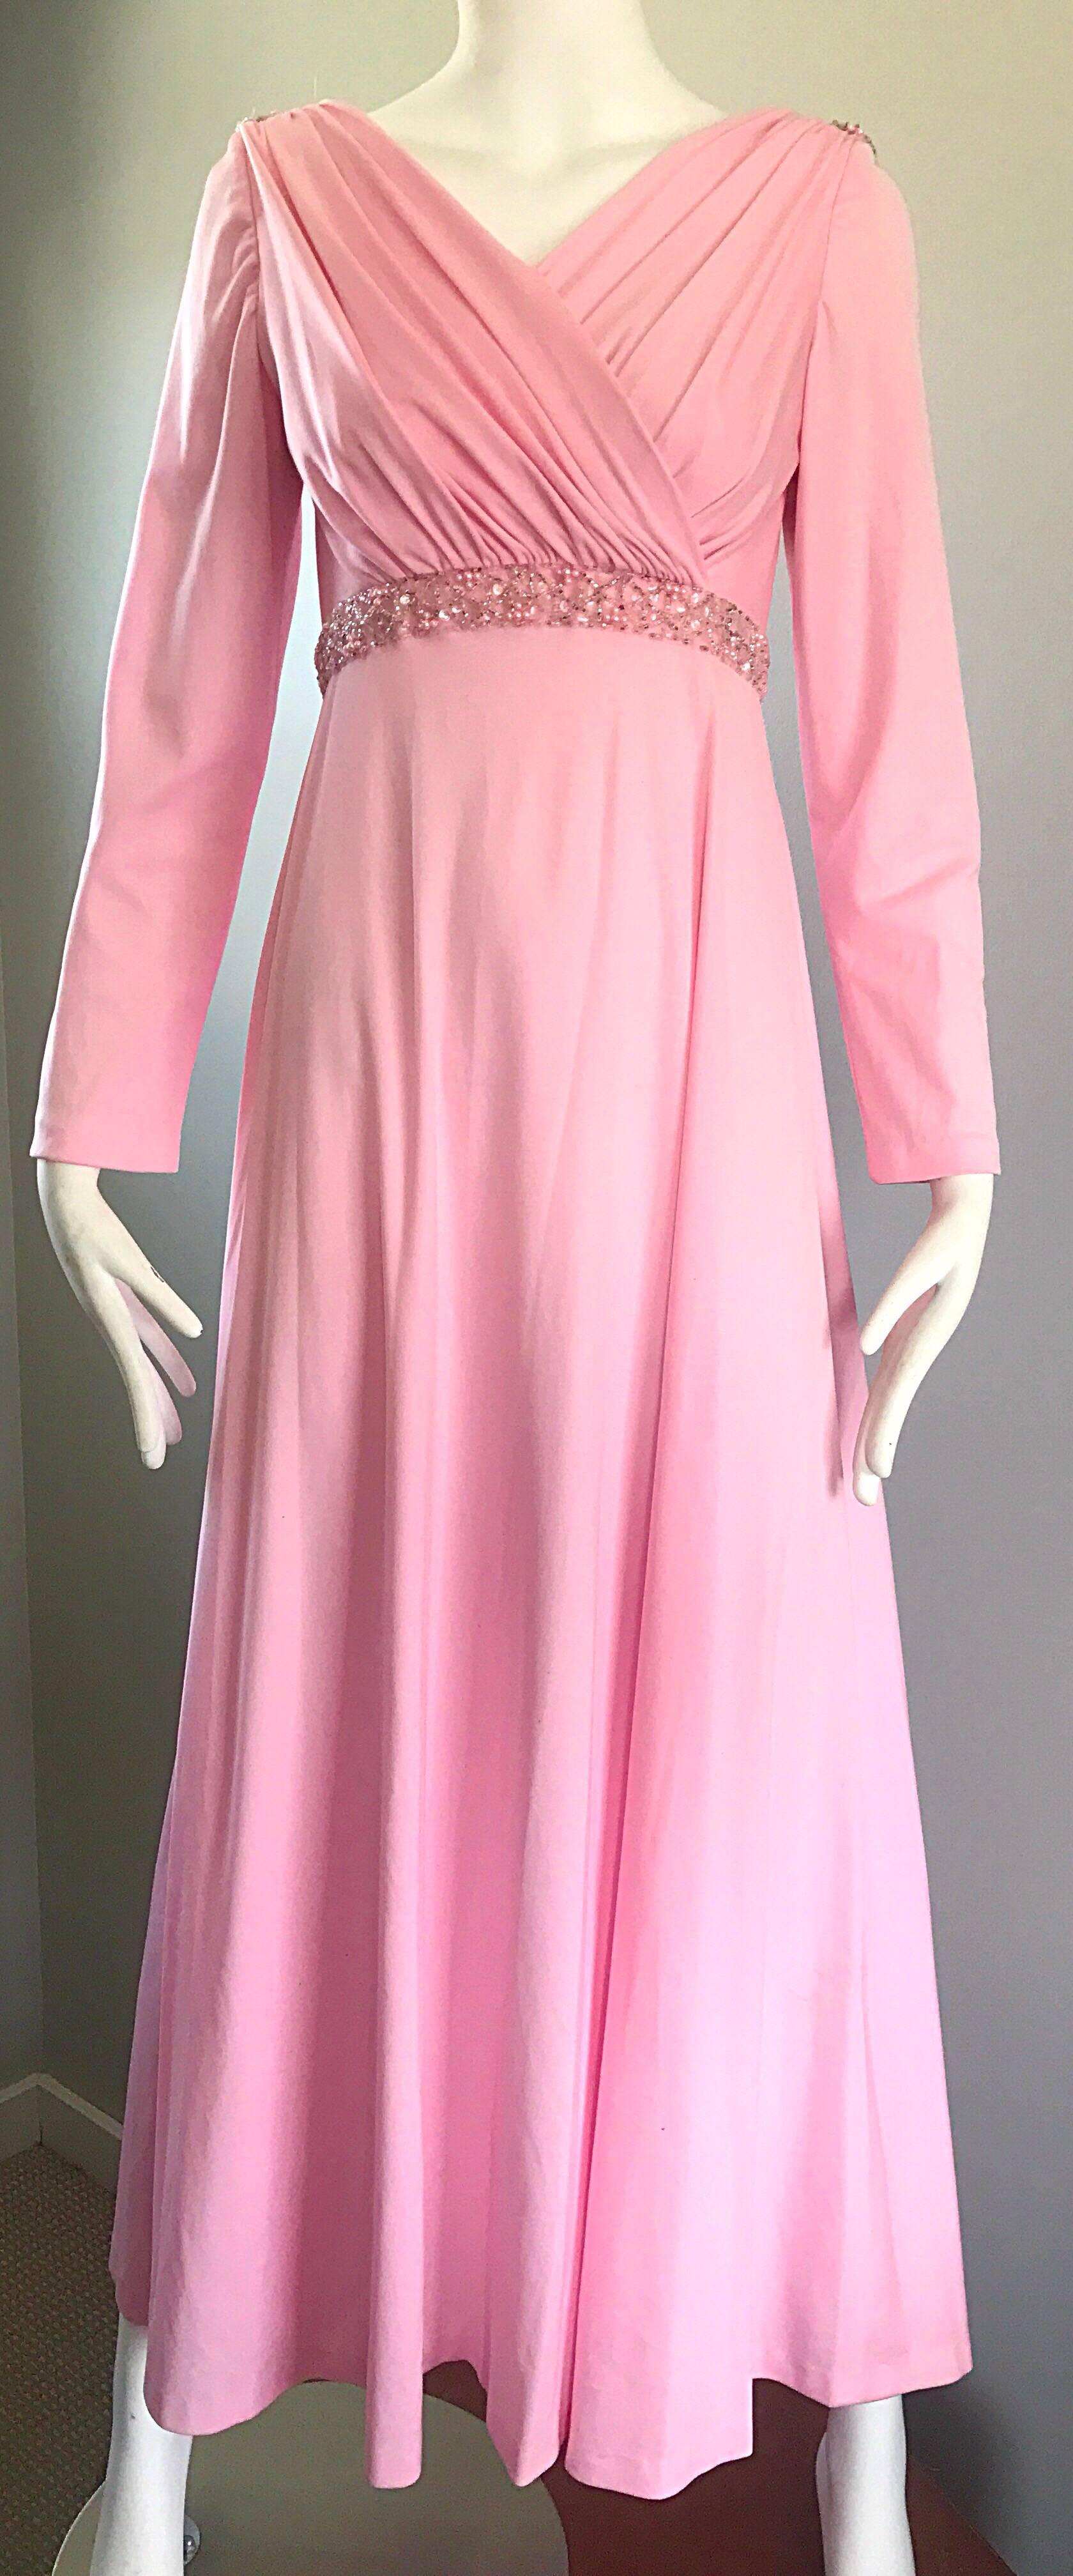 Amazing 1970s Light Pink Grecian Sequined and Beaded Long Sleeve Maxi Dress Gown In Excellent Condition For Sale In San Diego, CA